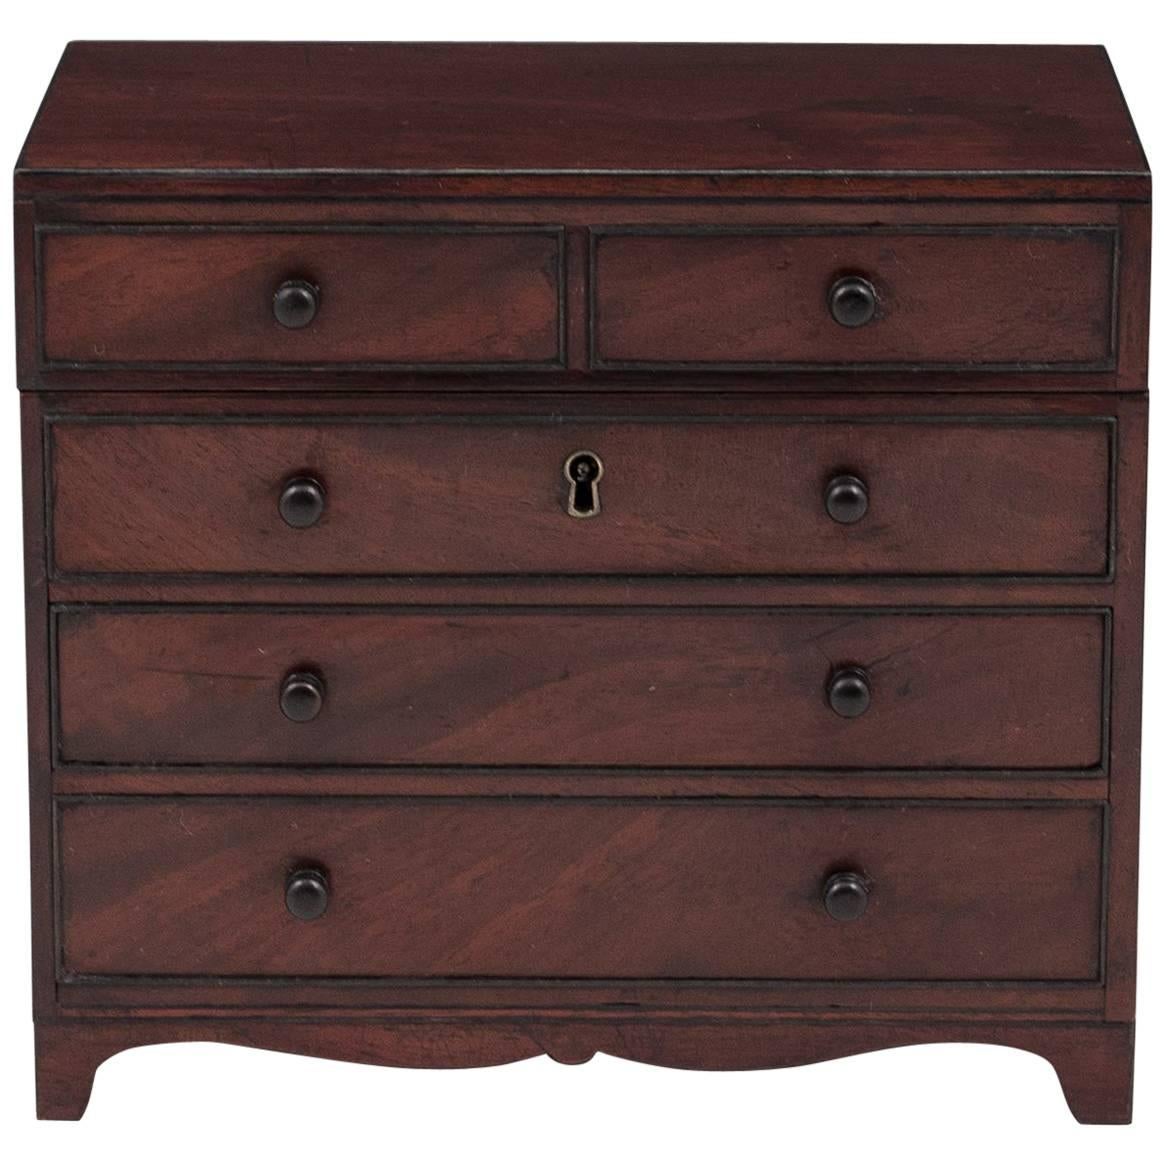 Rare Mahogany Chest of Drawers Tea Caddy, 19th Century For Sale